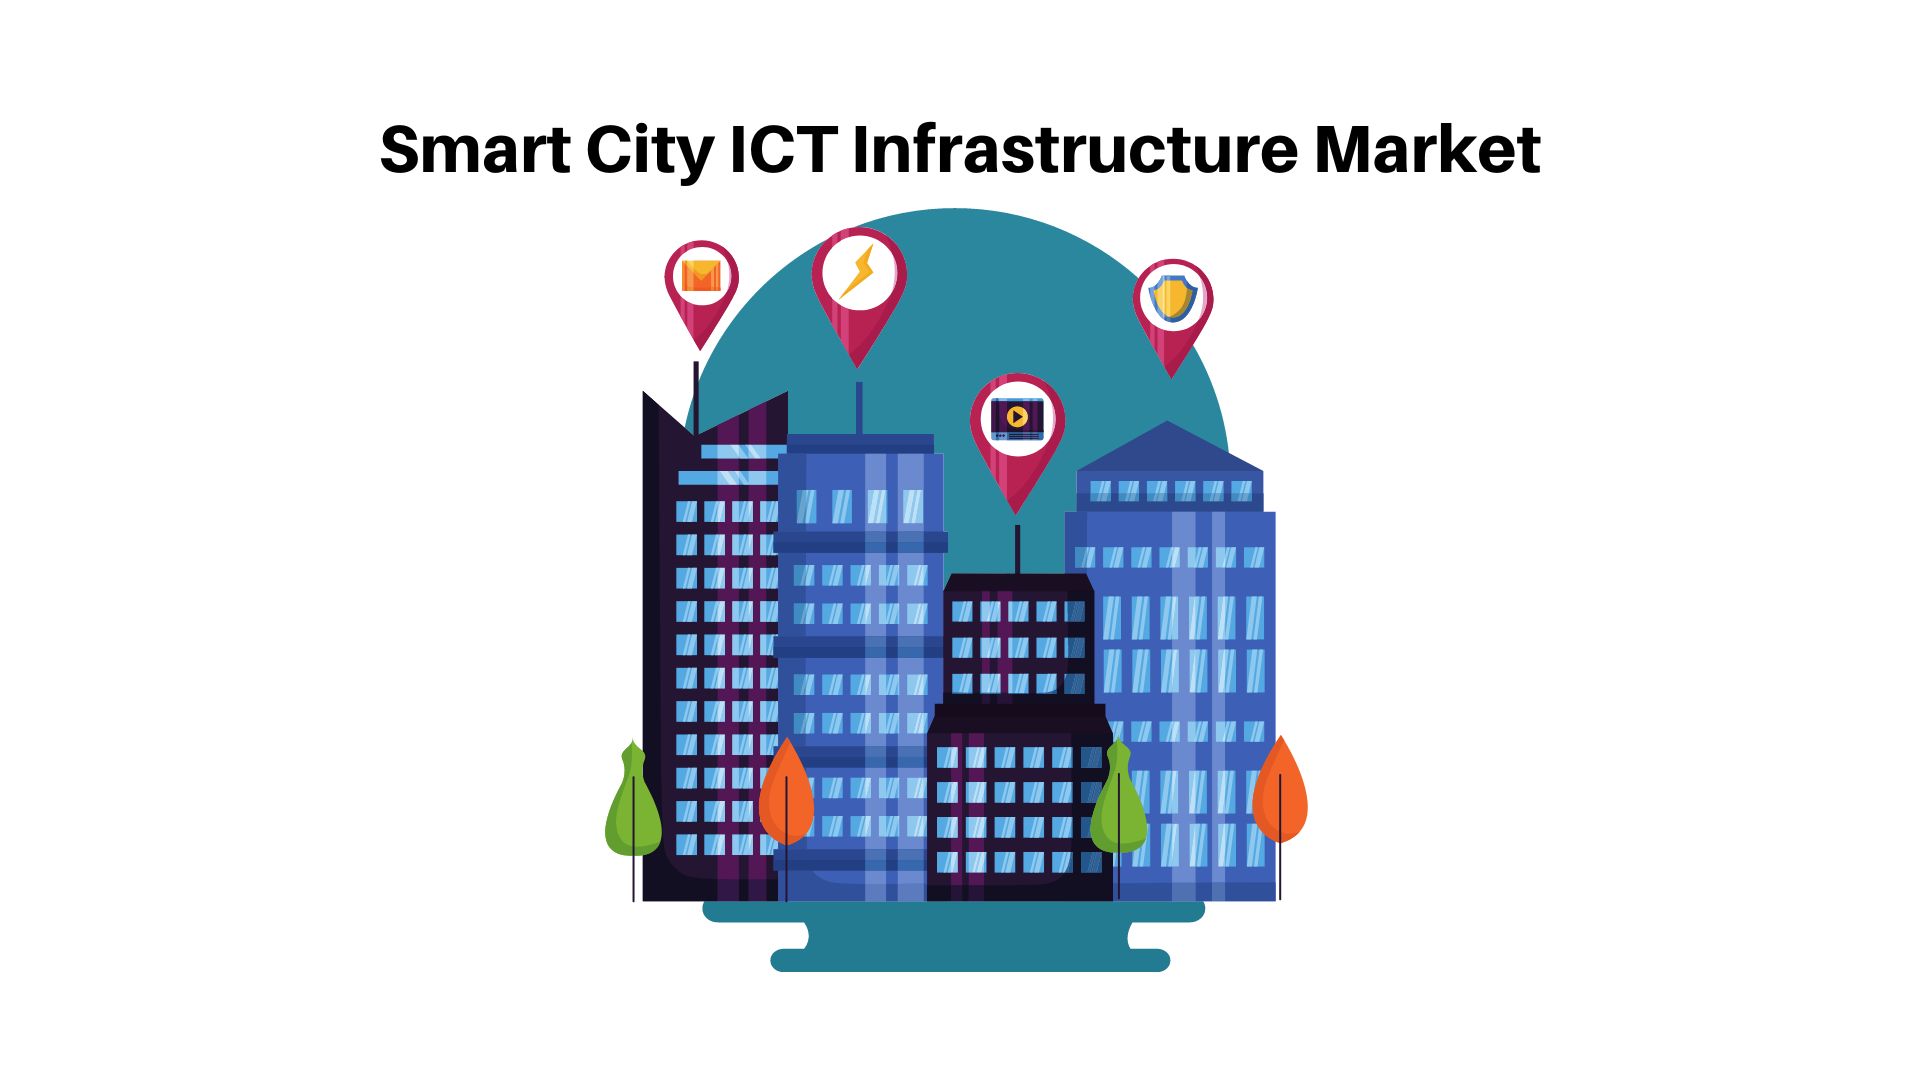 Smart City ICT Infrastructure Market Is Encouraged to Reach USD 6758.82 Billion by 2032